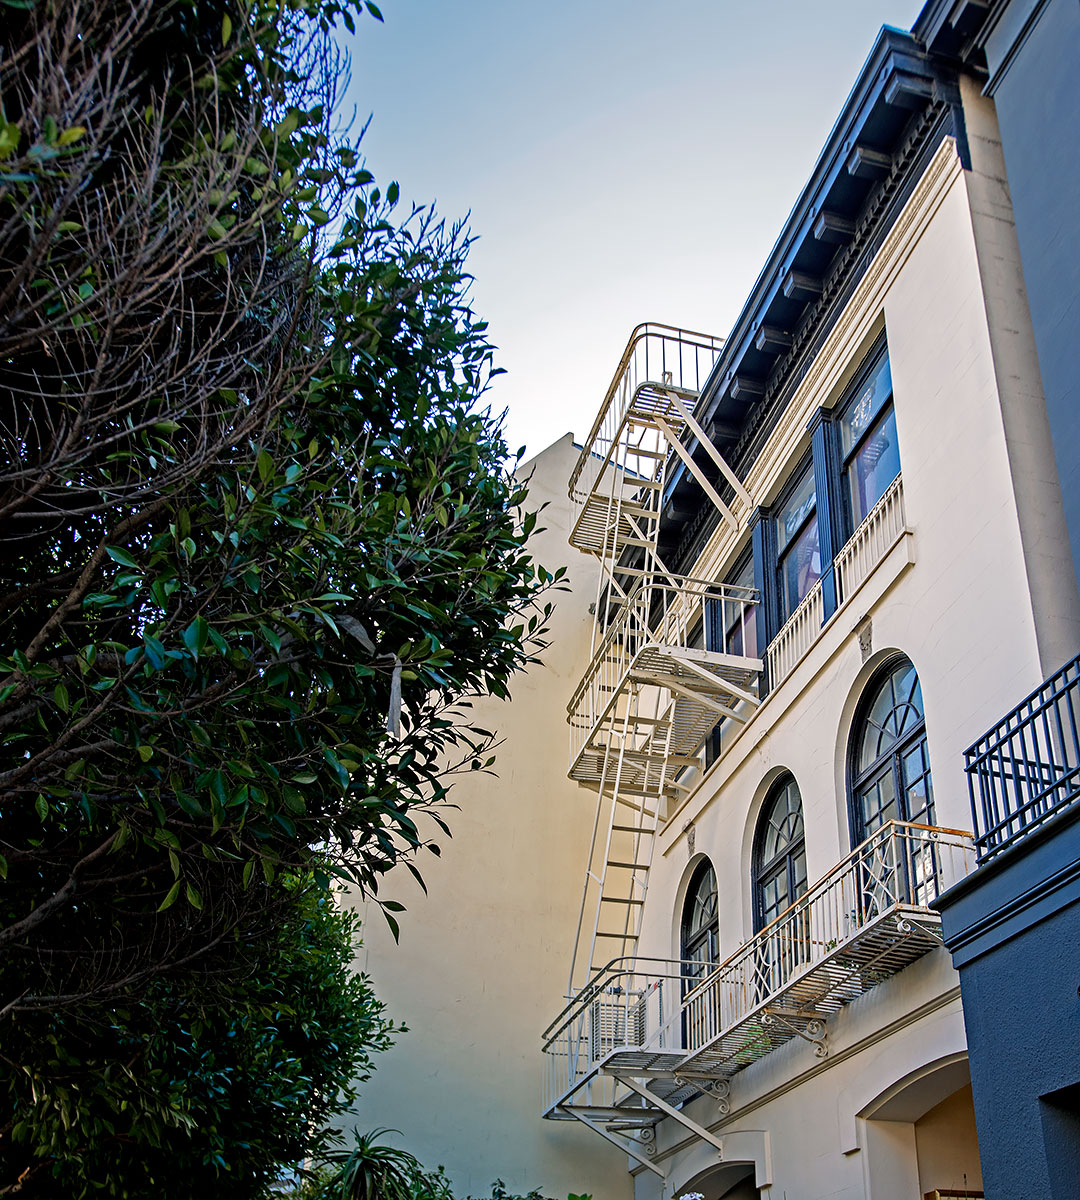 2157 Jackson Street in Pacific Heights, designed by Edward E. Young, built 1917